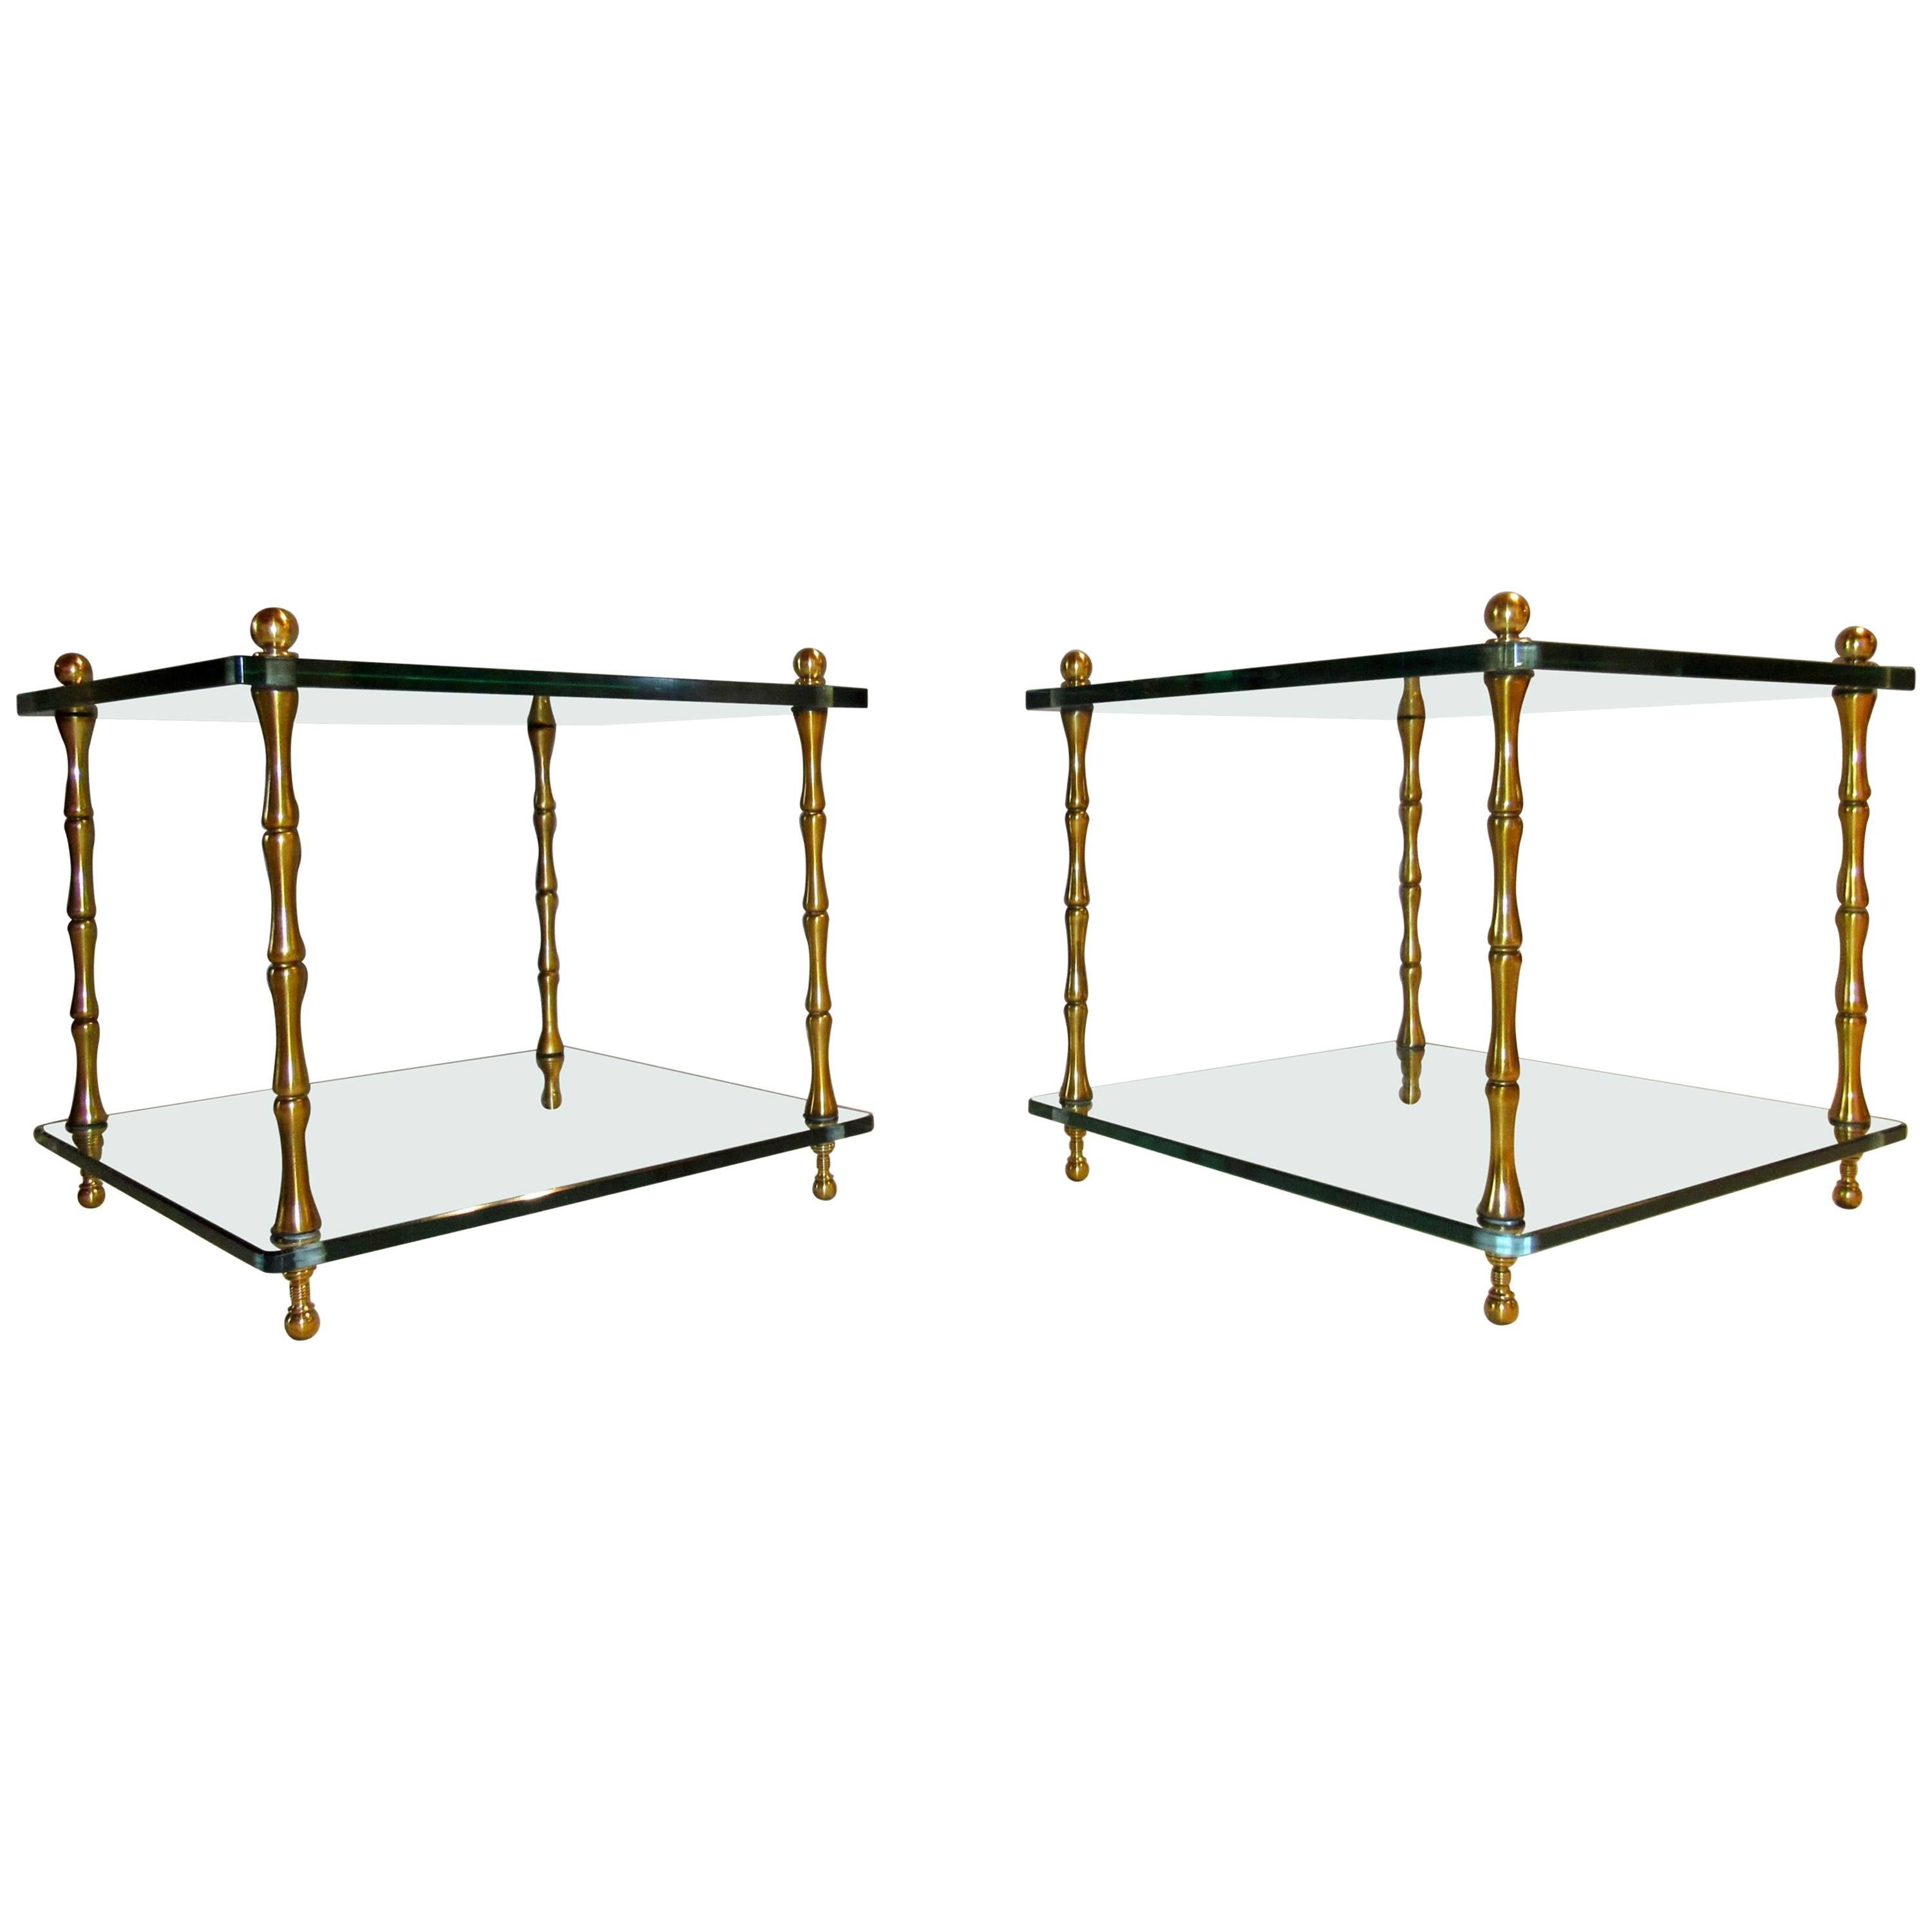 Baker Furniture Company Brass Tables Mid Century Two-Tiered Glass Shelves 1960s For Sale